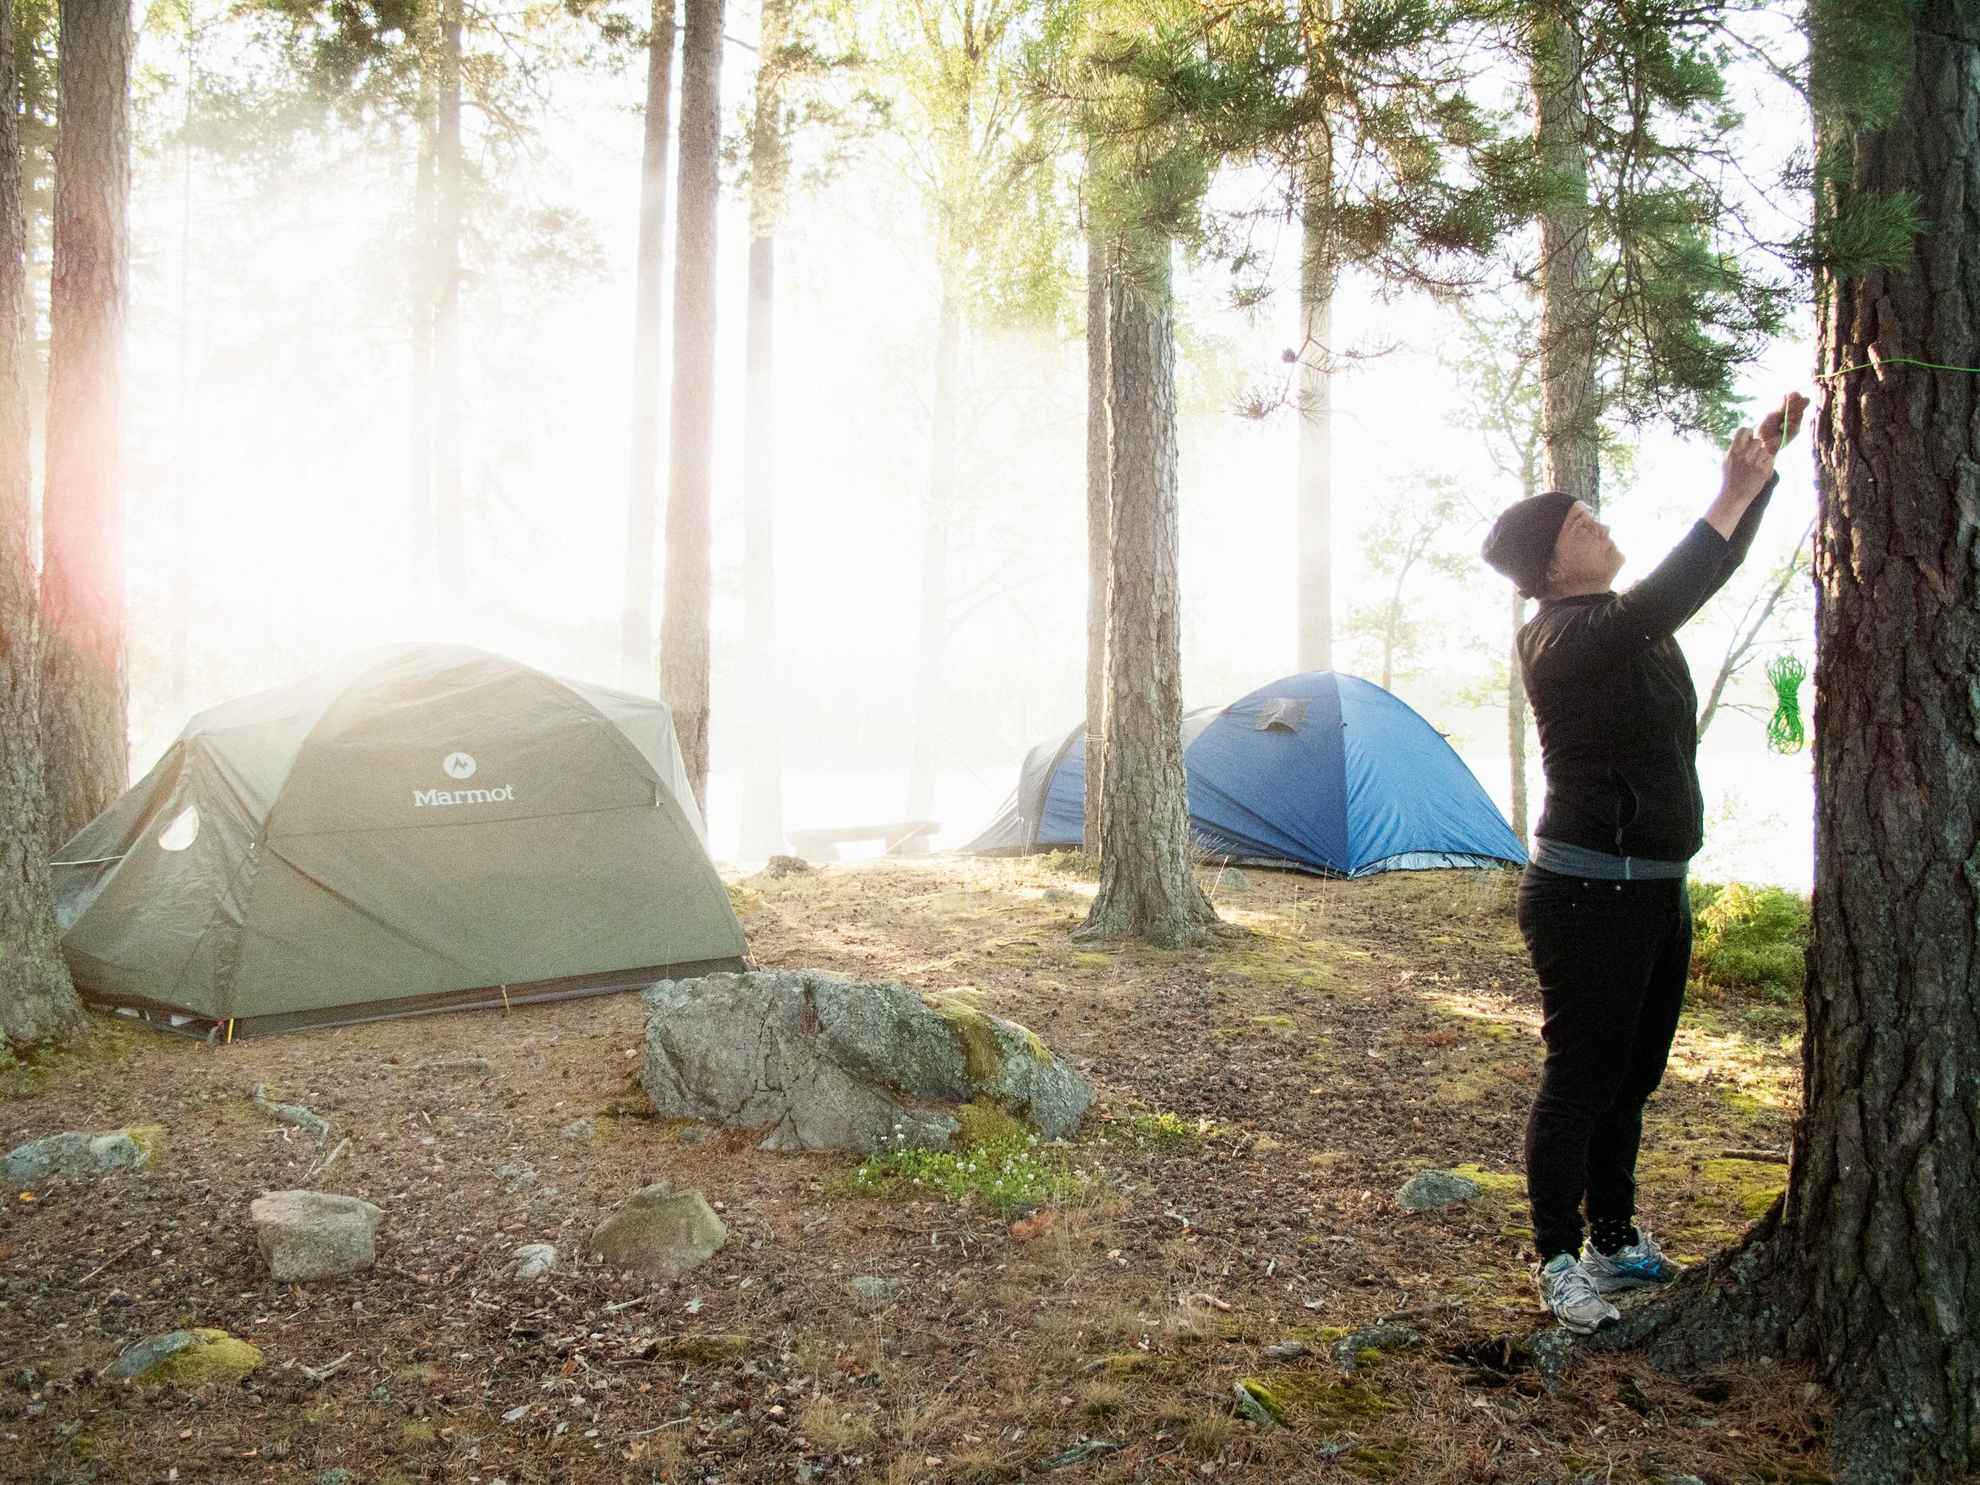 A woman is setting up a tent in the woods in Sweden.